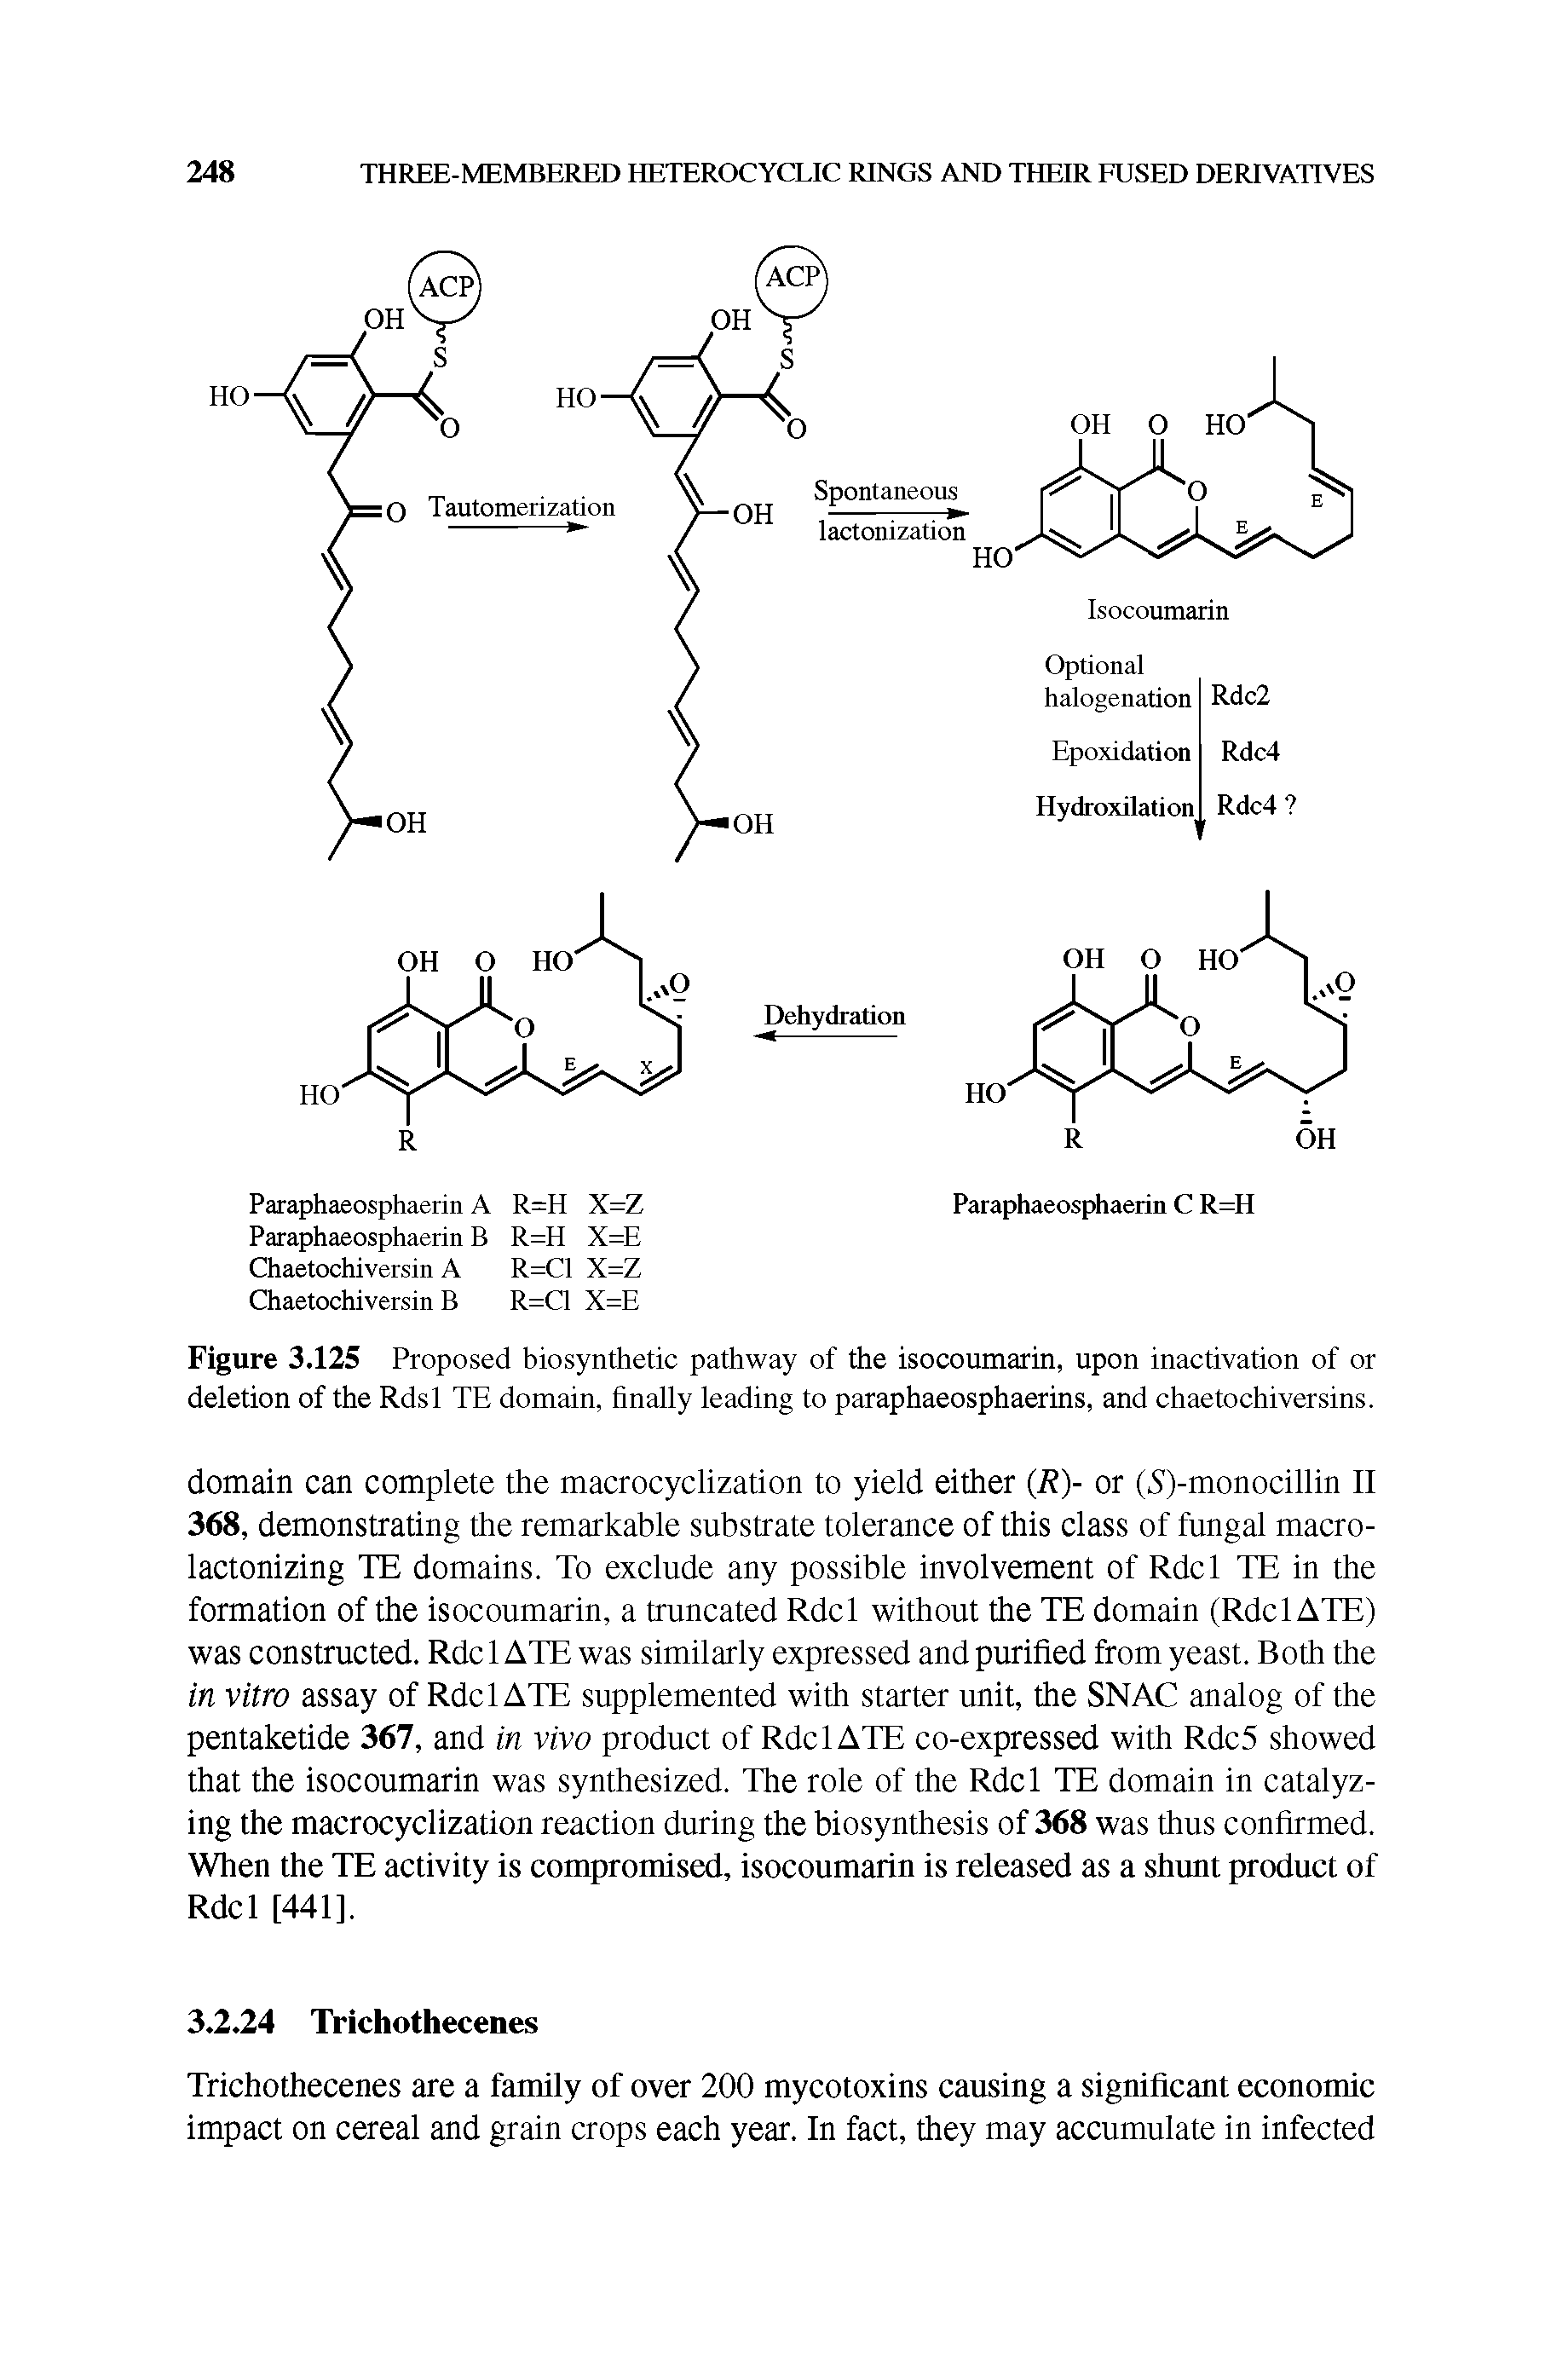 Figure 3.125 Proposed biosynthetic pathway of the isocoumarin, upon inactivation of or deletion of the Rdsl TE domain, finally leading to paraphaeosphaerins, and chaetochiversins.